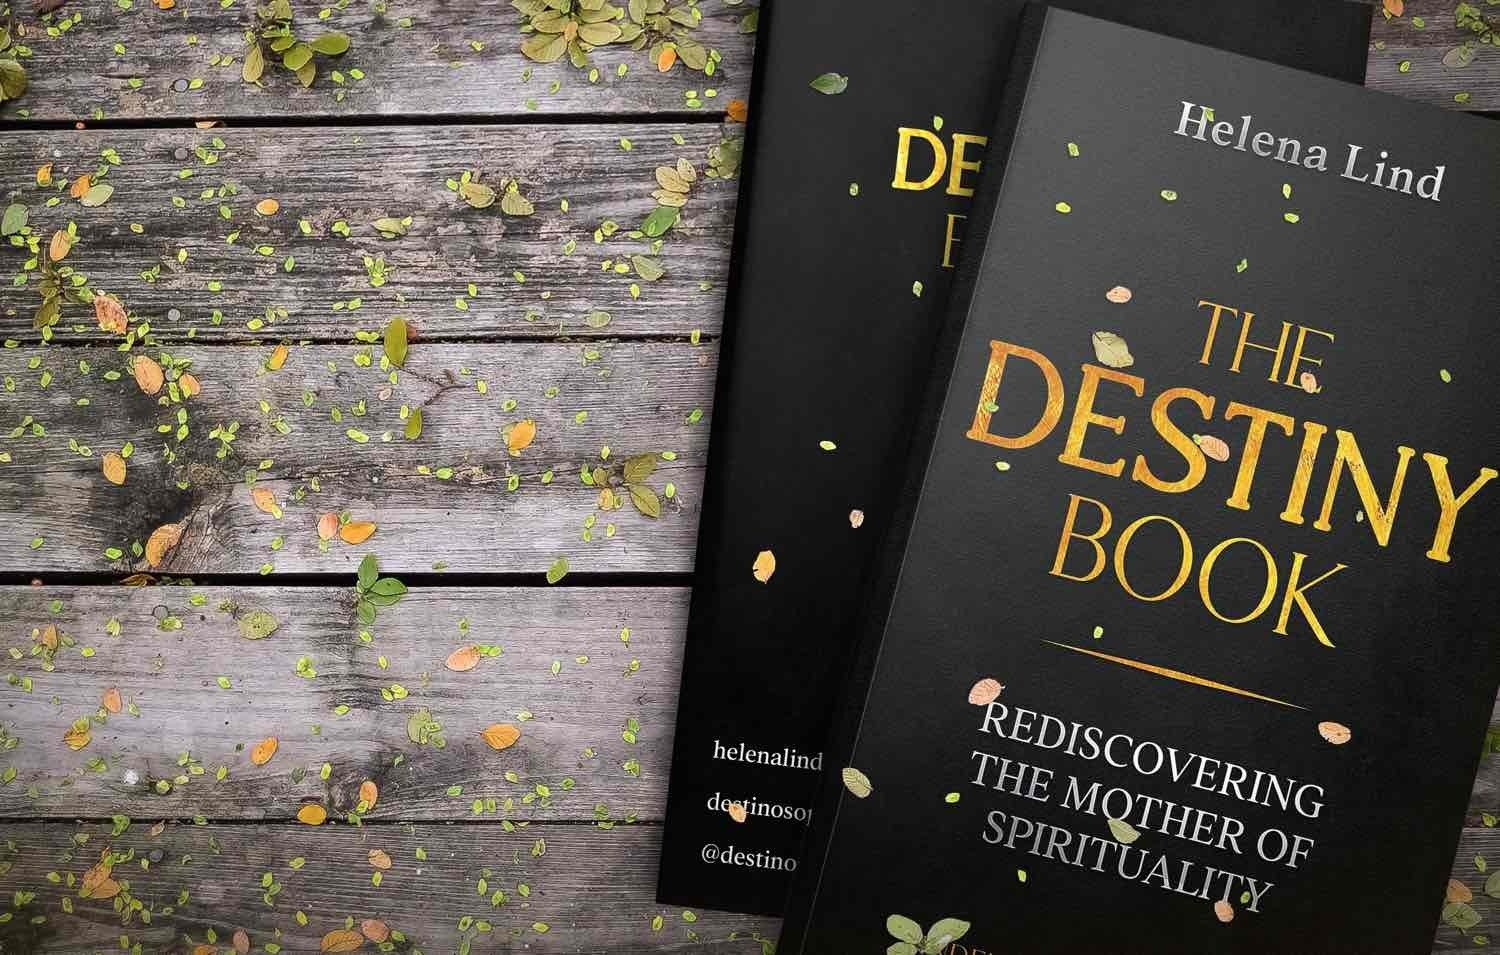 The Destiny Book: Rediscovering the Mother of Spirituality by Helena Lind, interim cover.